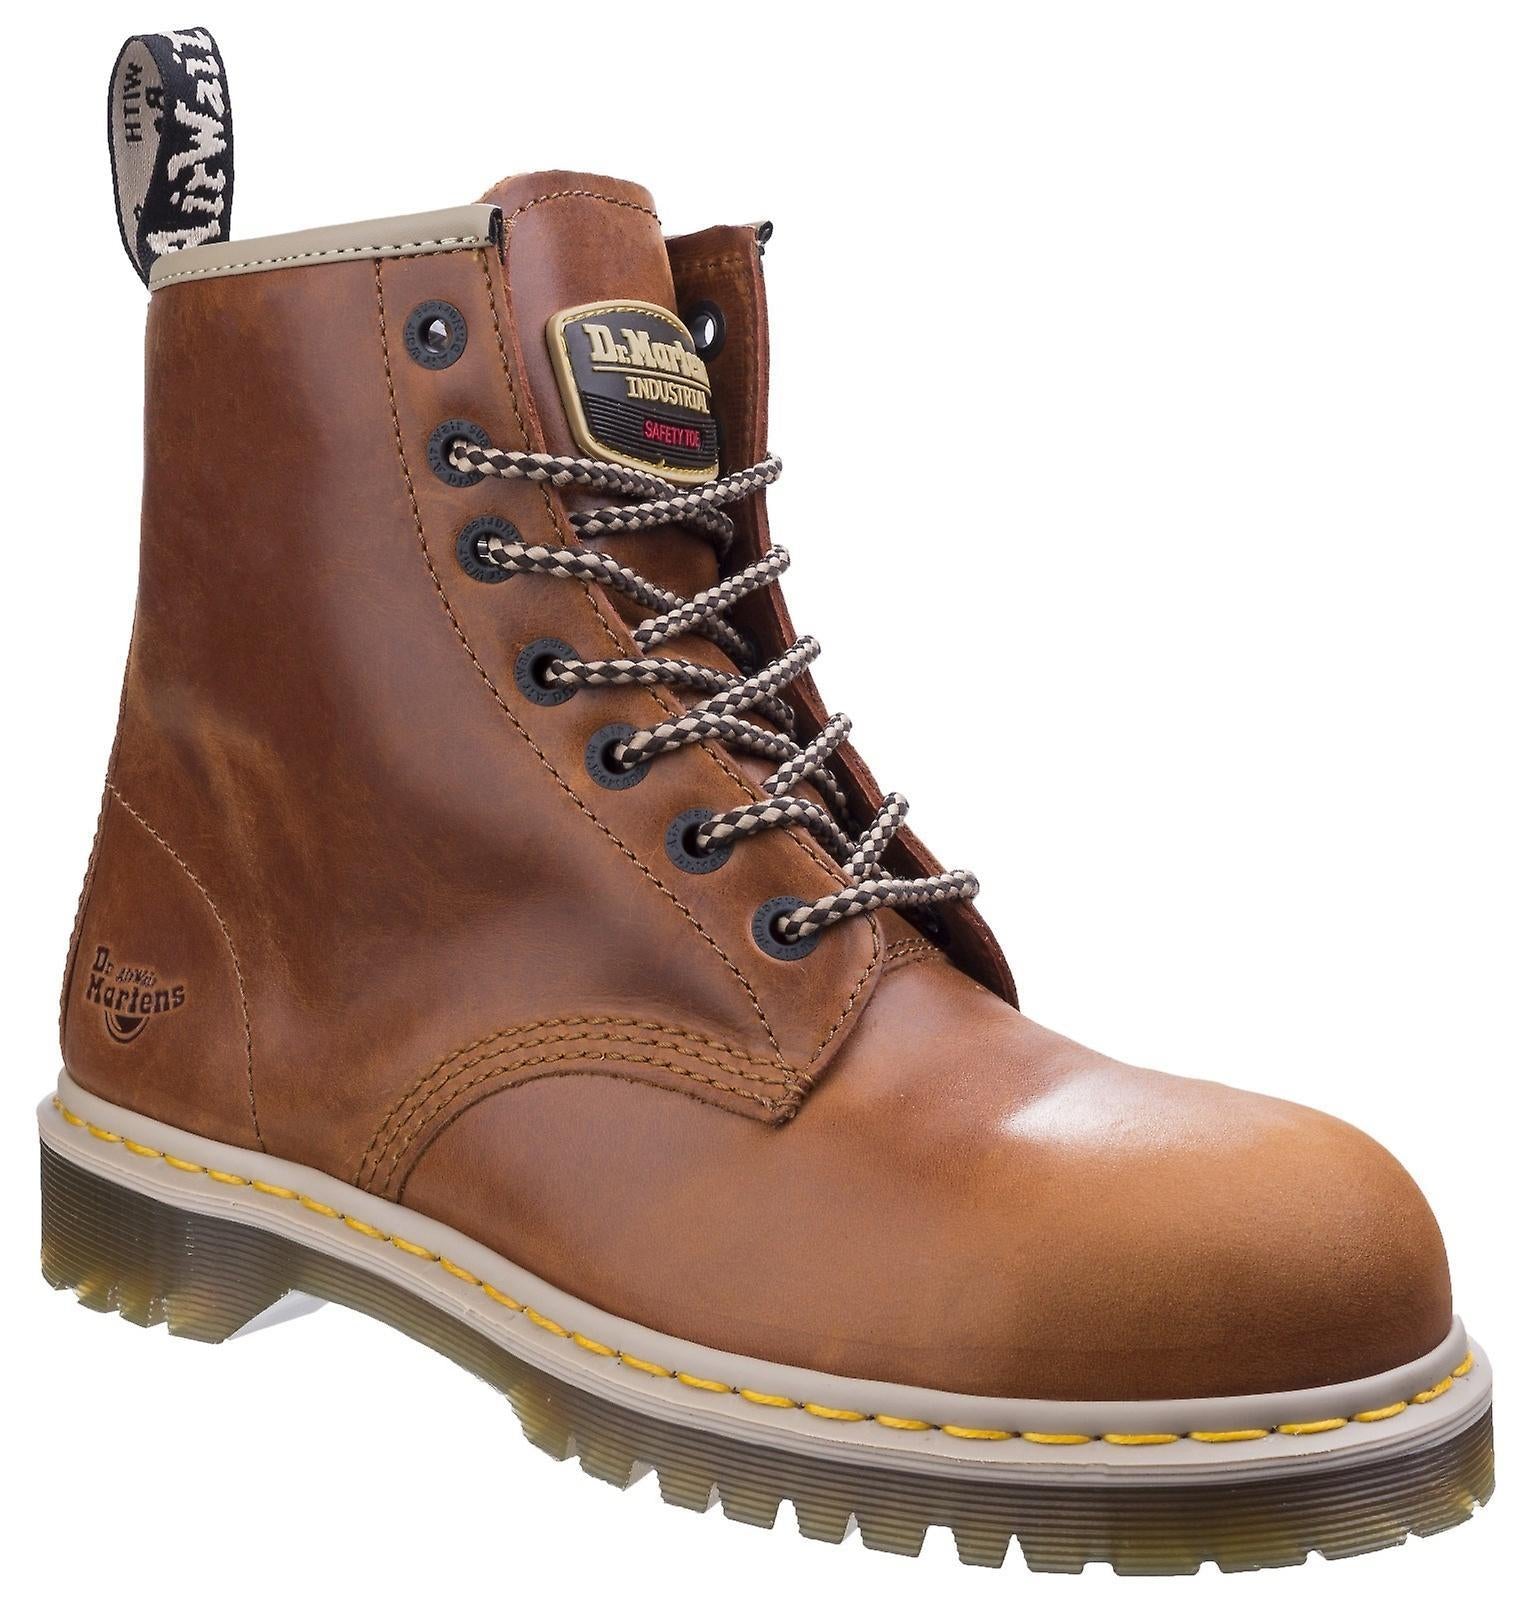 Dr Martens Icon 7B10 SB tan leather steel toe cap work safety boots